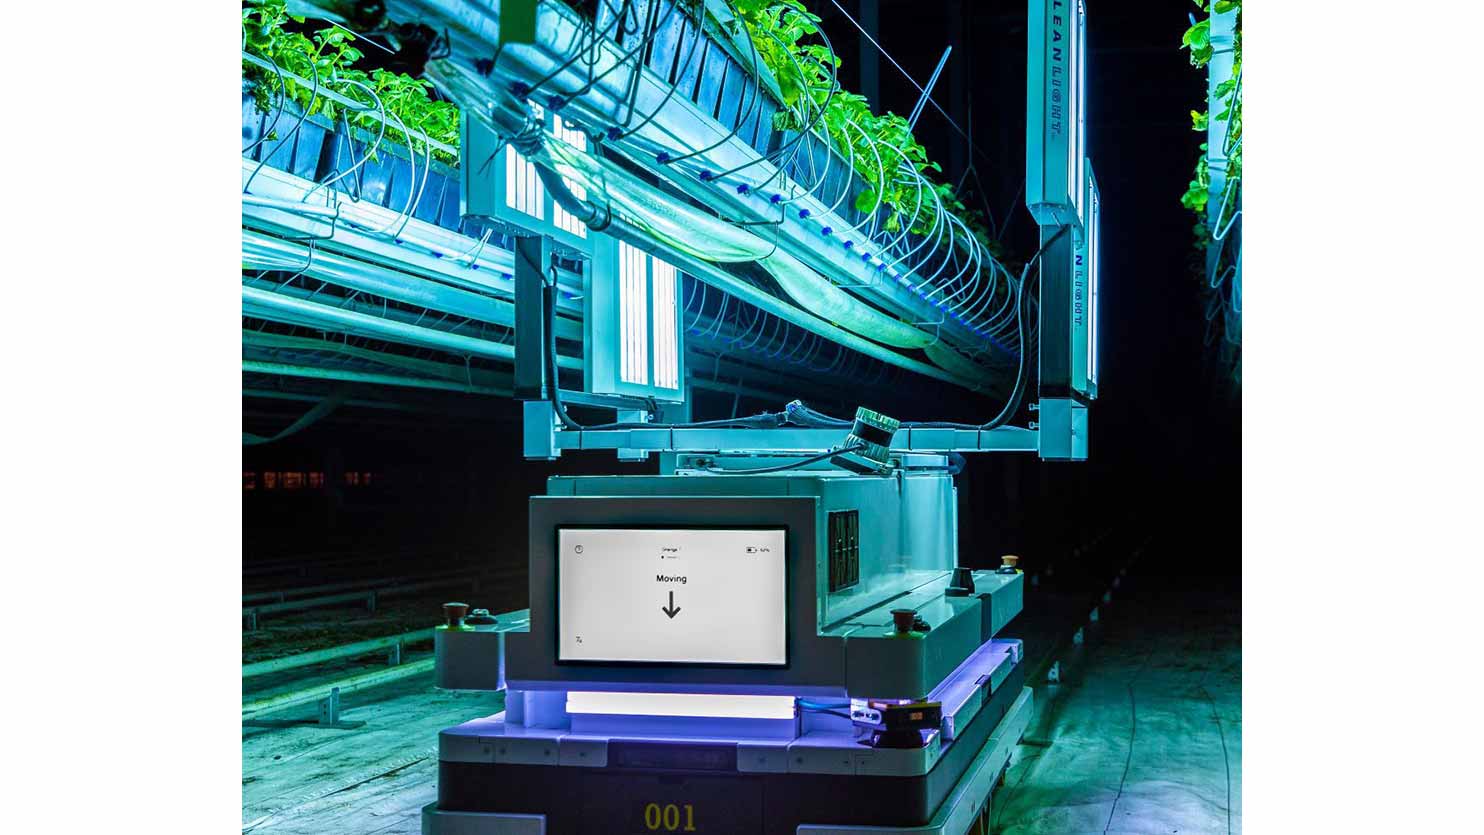 An autonome robot screens and illuminates plants with UV light to combat pest and disease development.